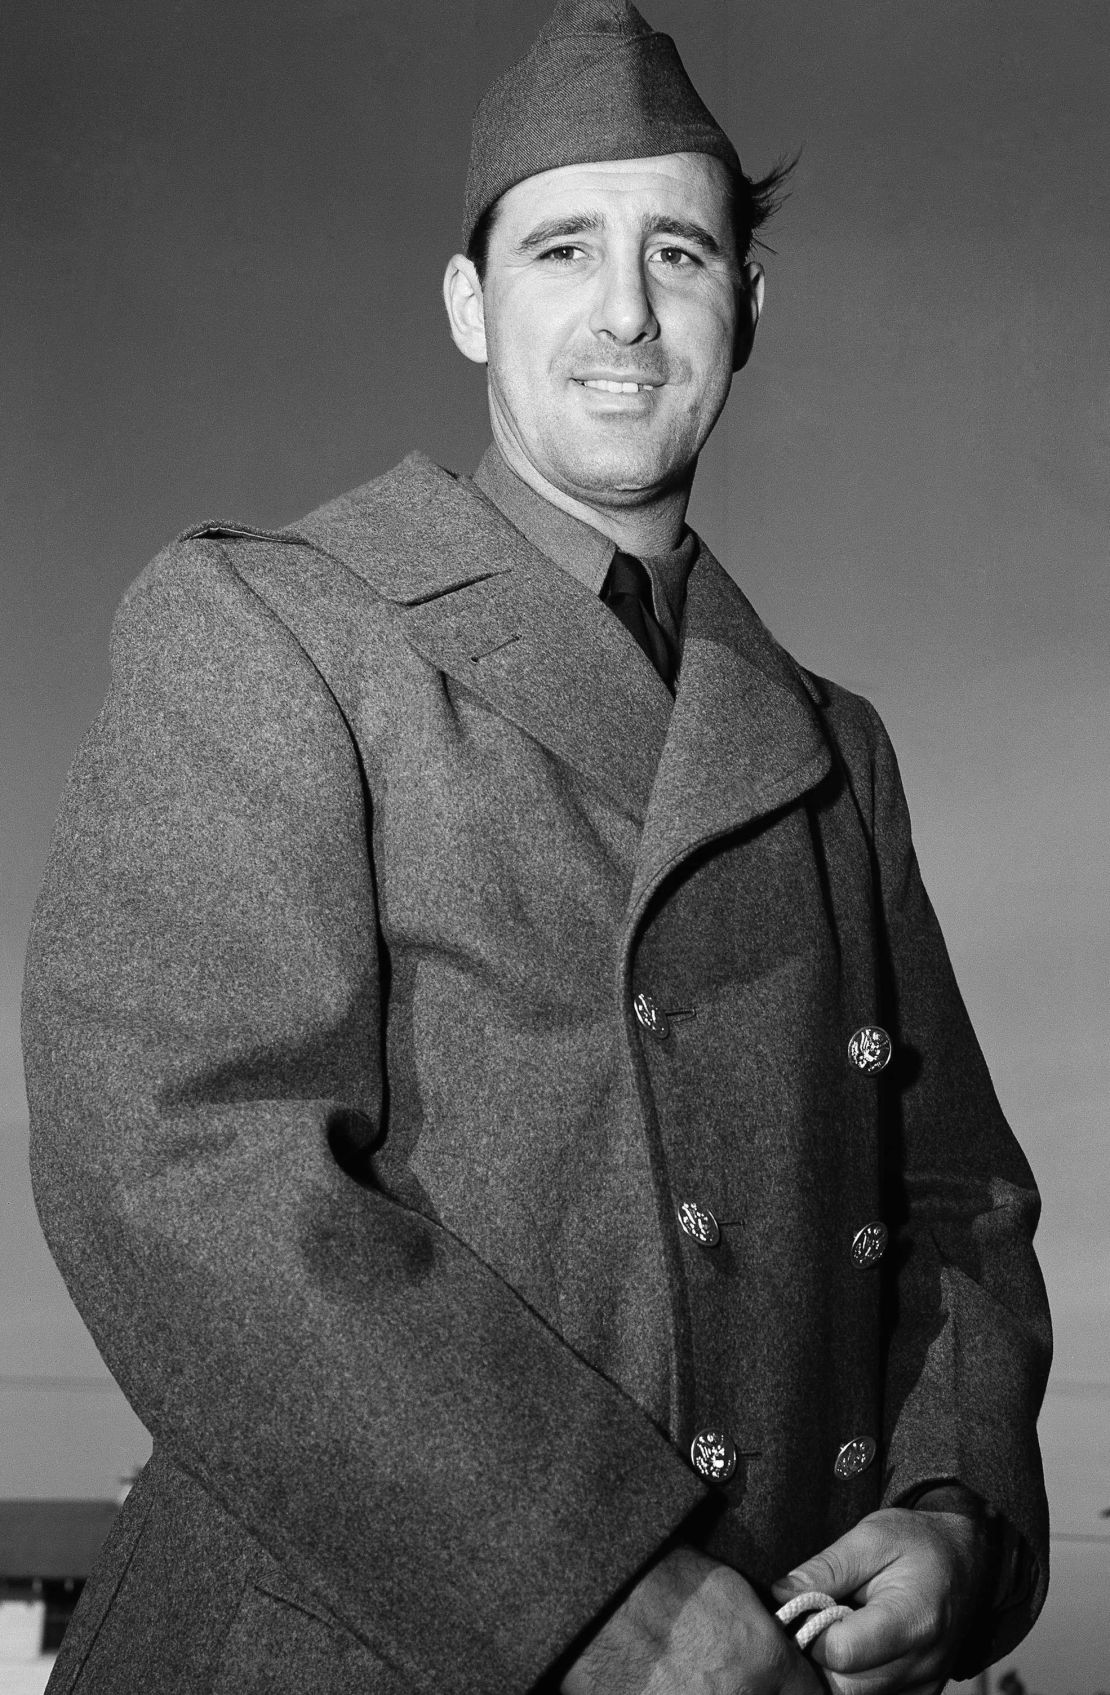 Hank Greenberg served 47 total months for the US Army during World War II.